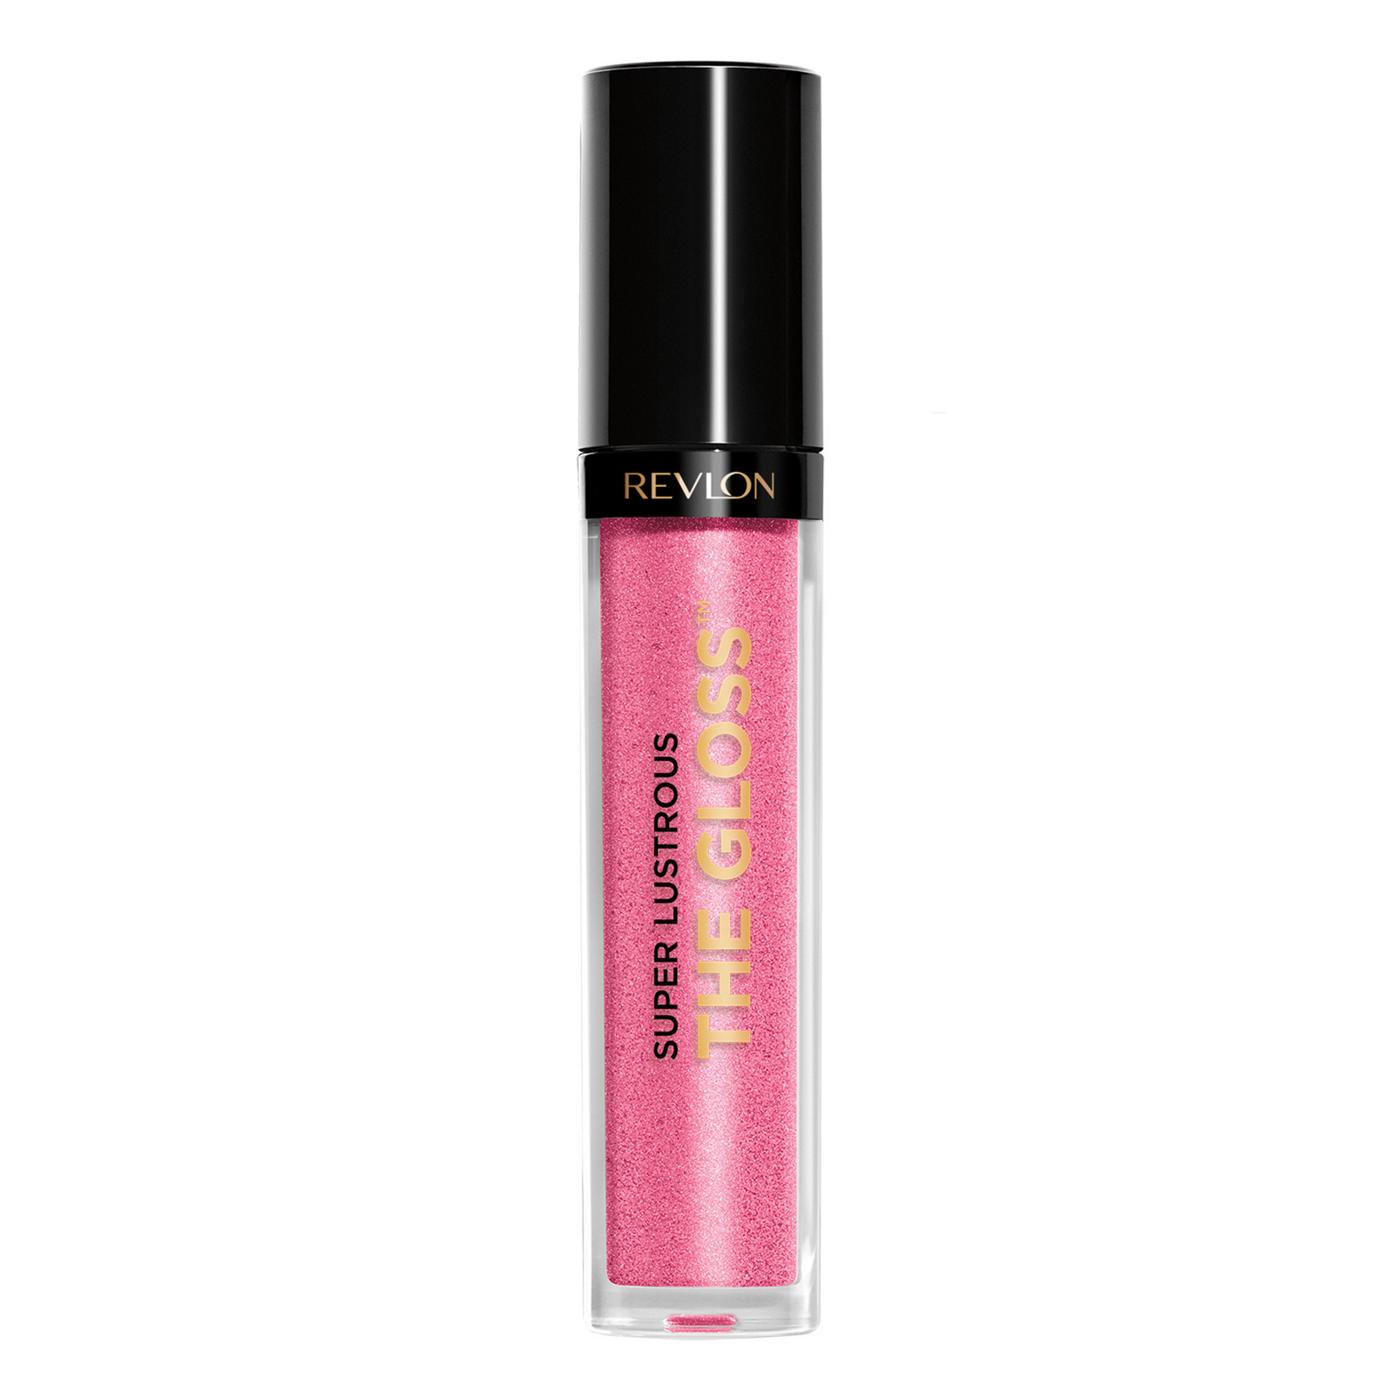 Revlon Super Lustrous The Gloss, 210 Pinkissimo; image 1 of 9